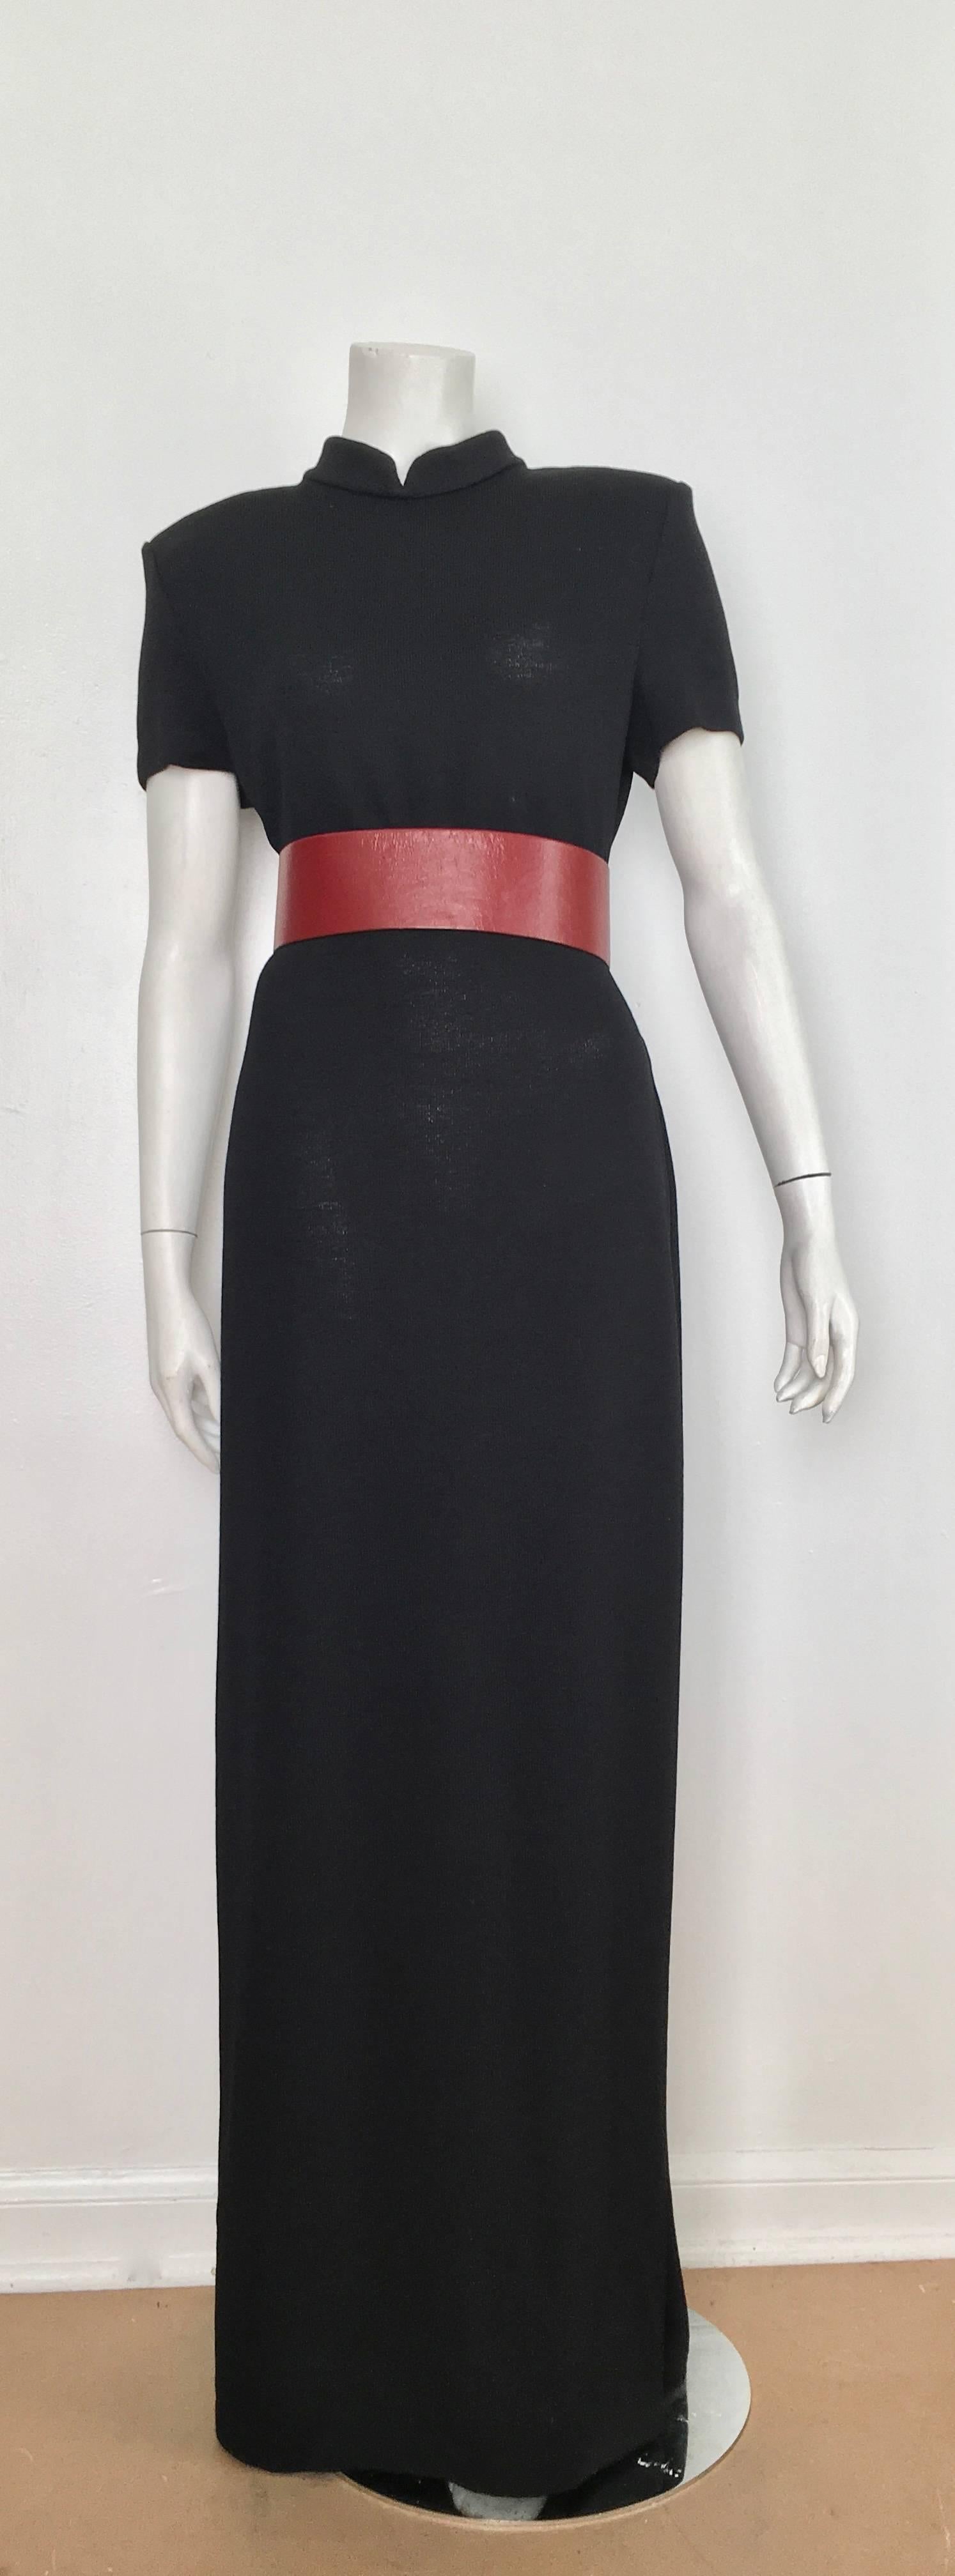 St. John black knit short sleeve maxi evening dress with cutout band around waistline is a size 10.  This ultra contemporary & sophisticated maxi dress with the cutout square pattern around waistline can be sexy or you can slap a wide Geoffrey Beene